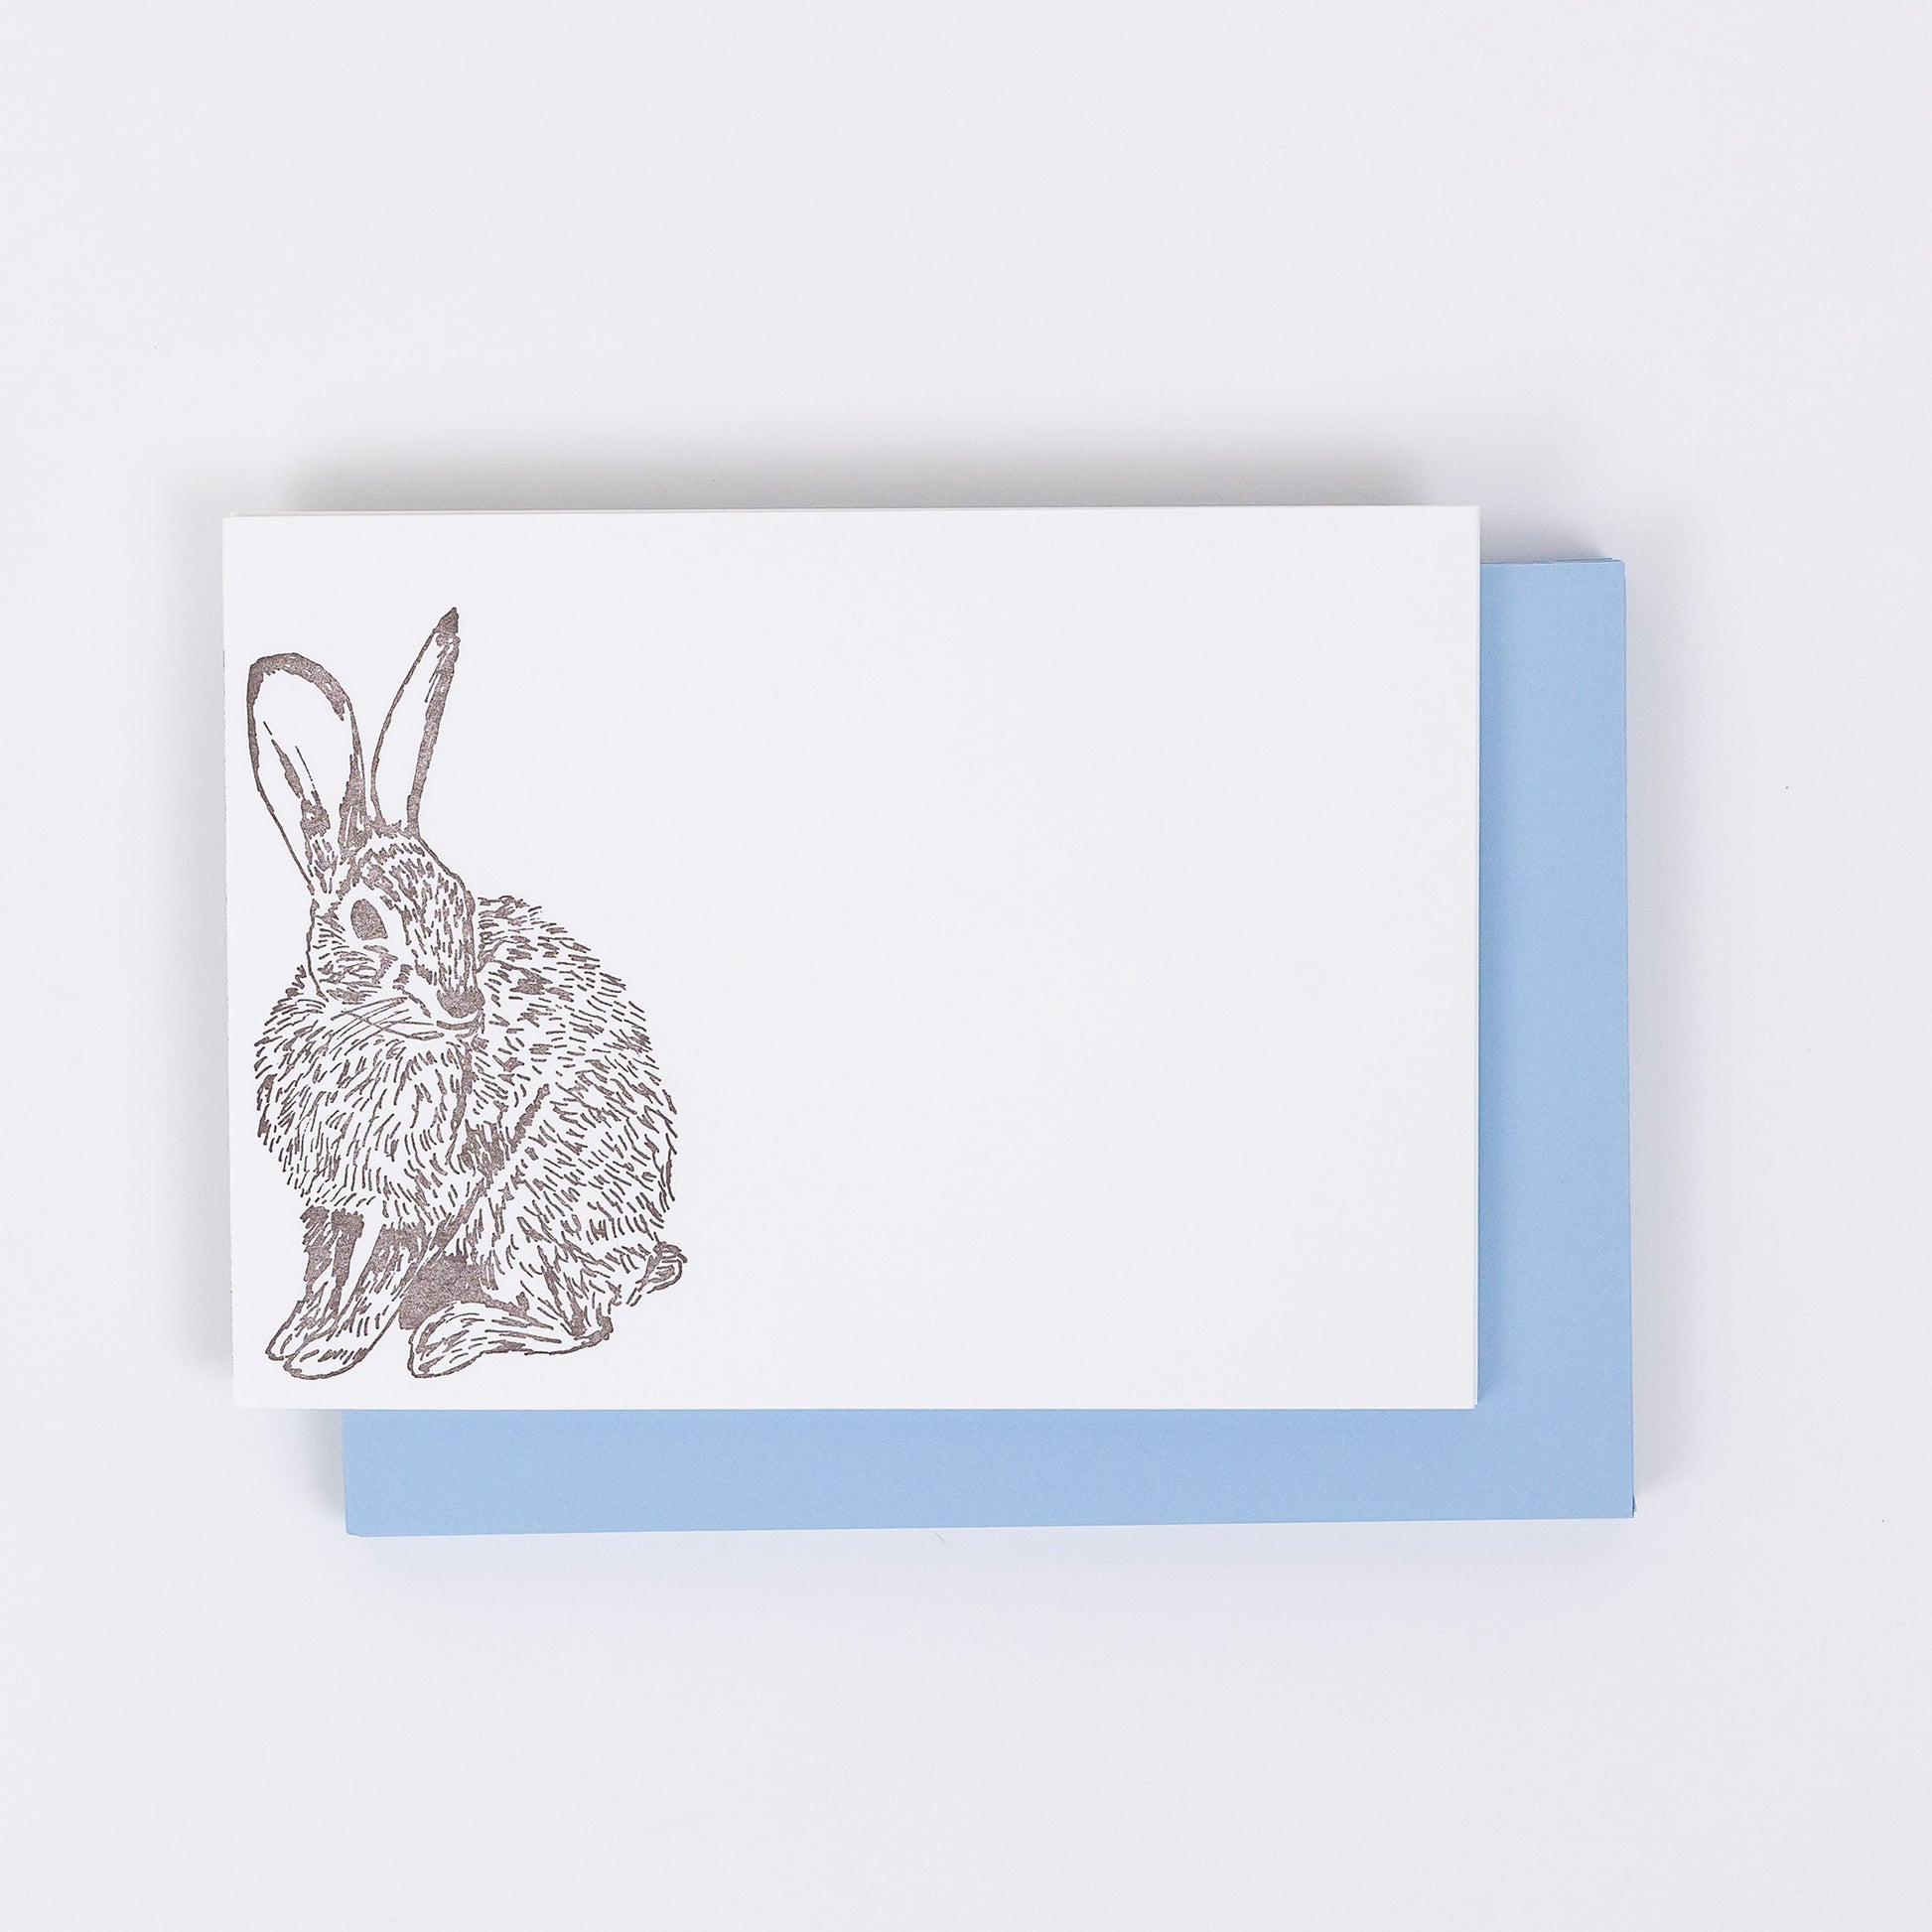 Set of 10 Letterpress Note Cards featuring a hand-drawn Cottontail Rabbit letterpress printed in a warm brown ink onto 100% cotton paper. Includes 10 baby blue envelopes. Size A6.  The cards are stacked on the envelopes shown on a white background.